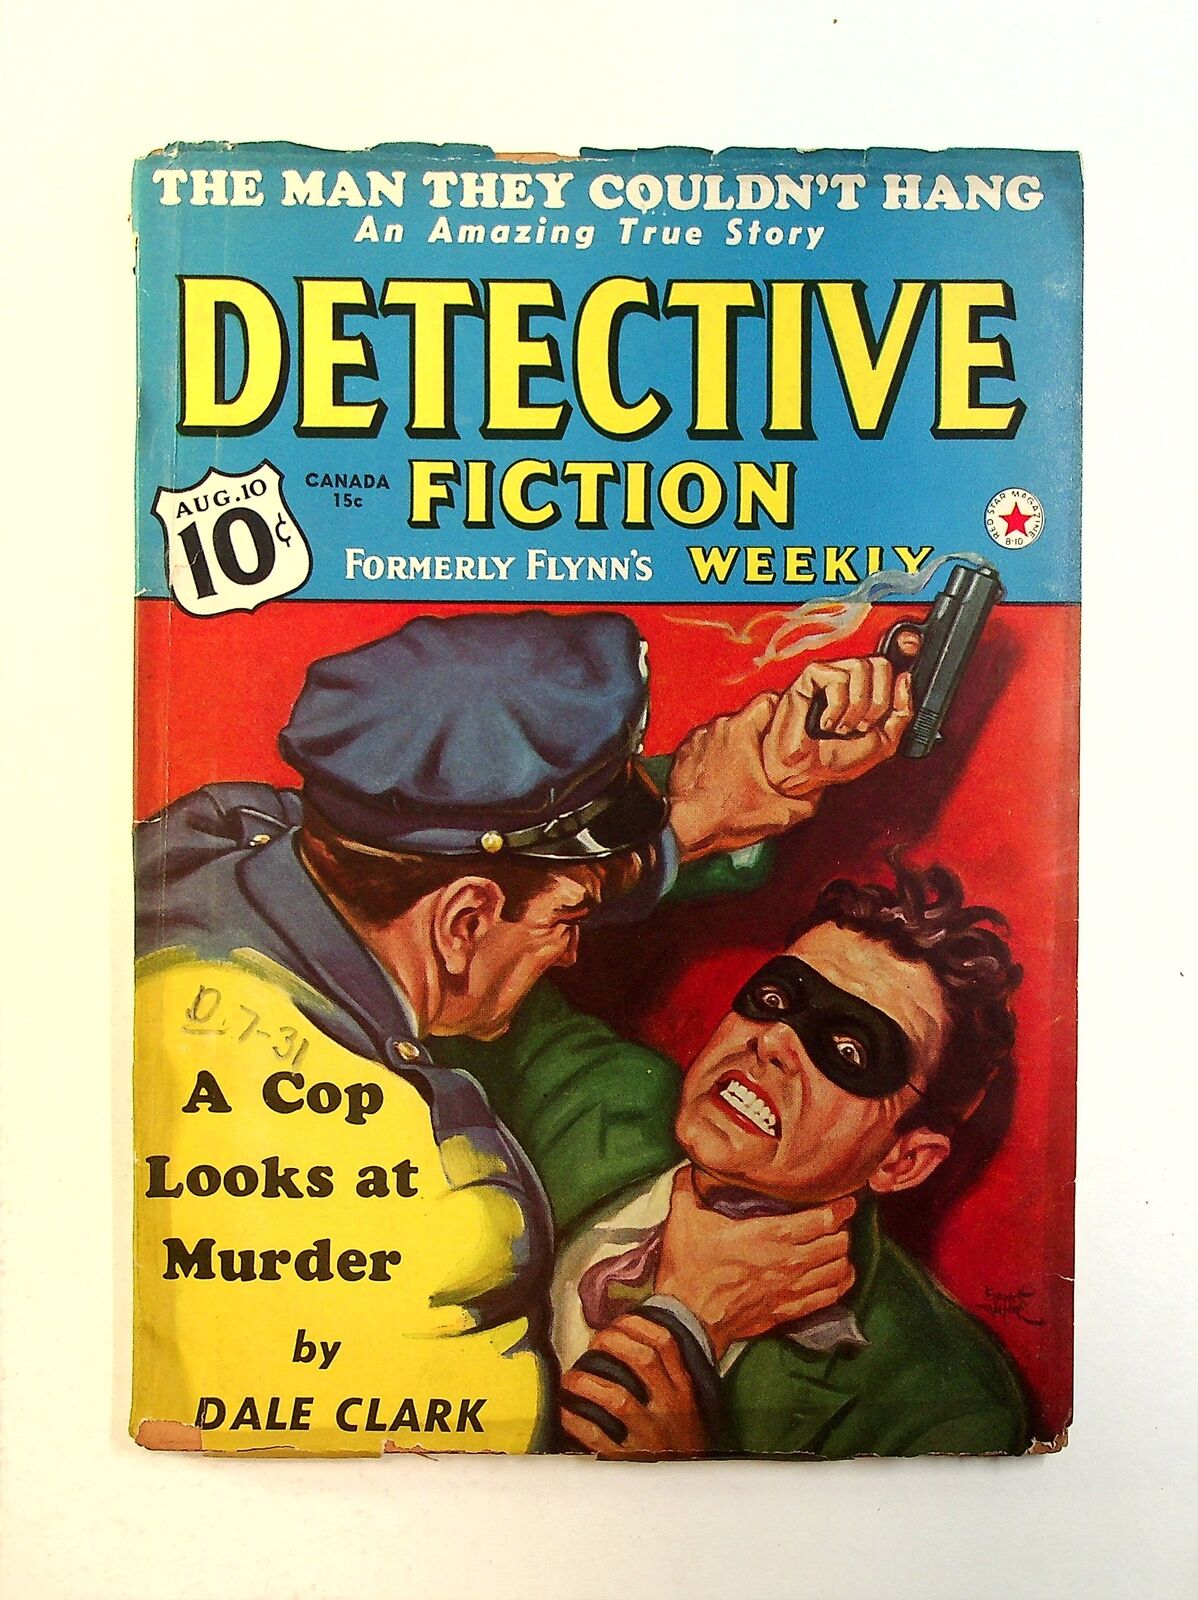 Detective Fiction Weekly Pulp Aug 10 1940 Vol. 139 #1 GD Low Grade